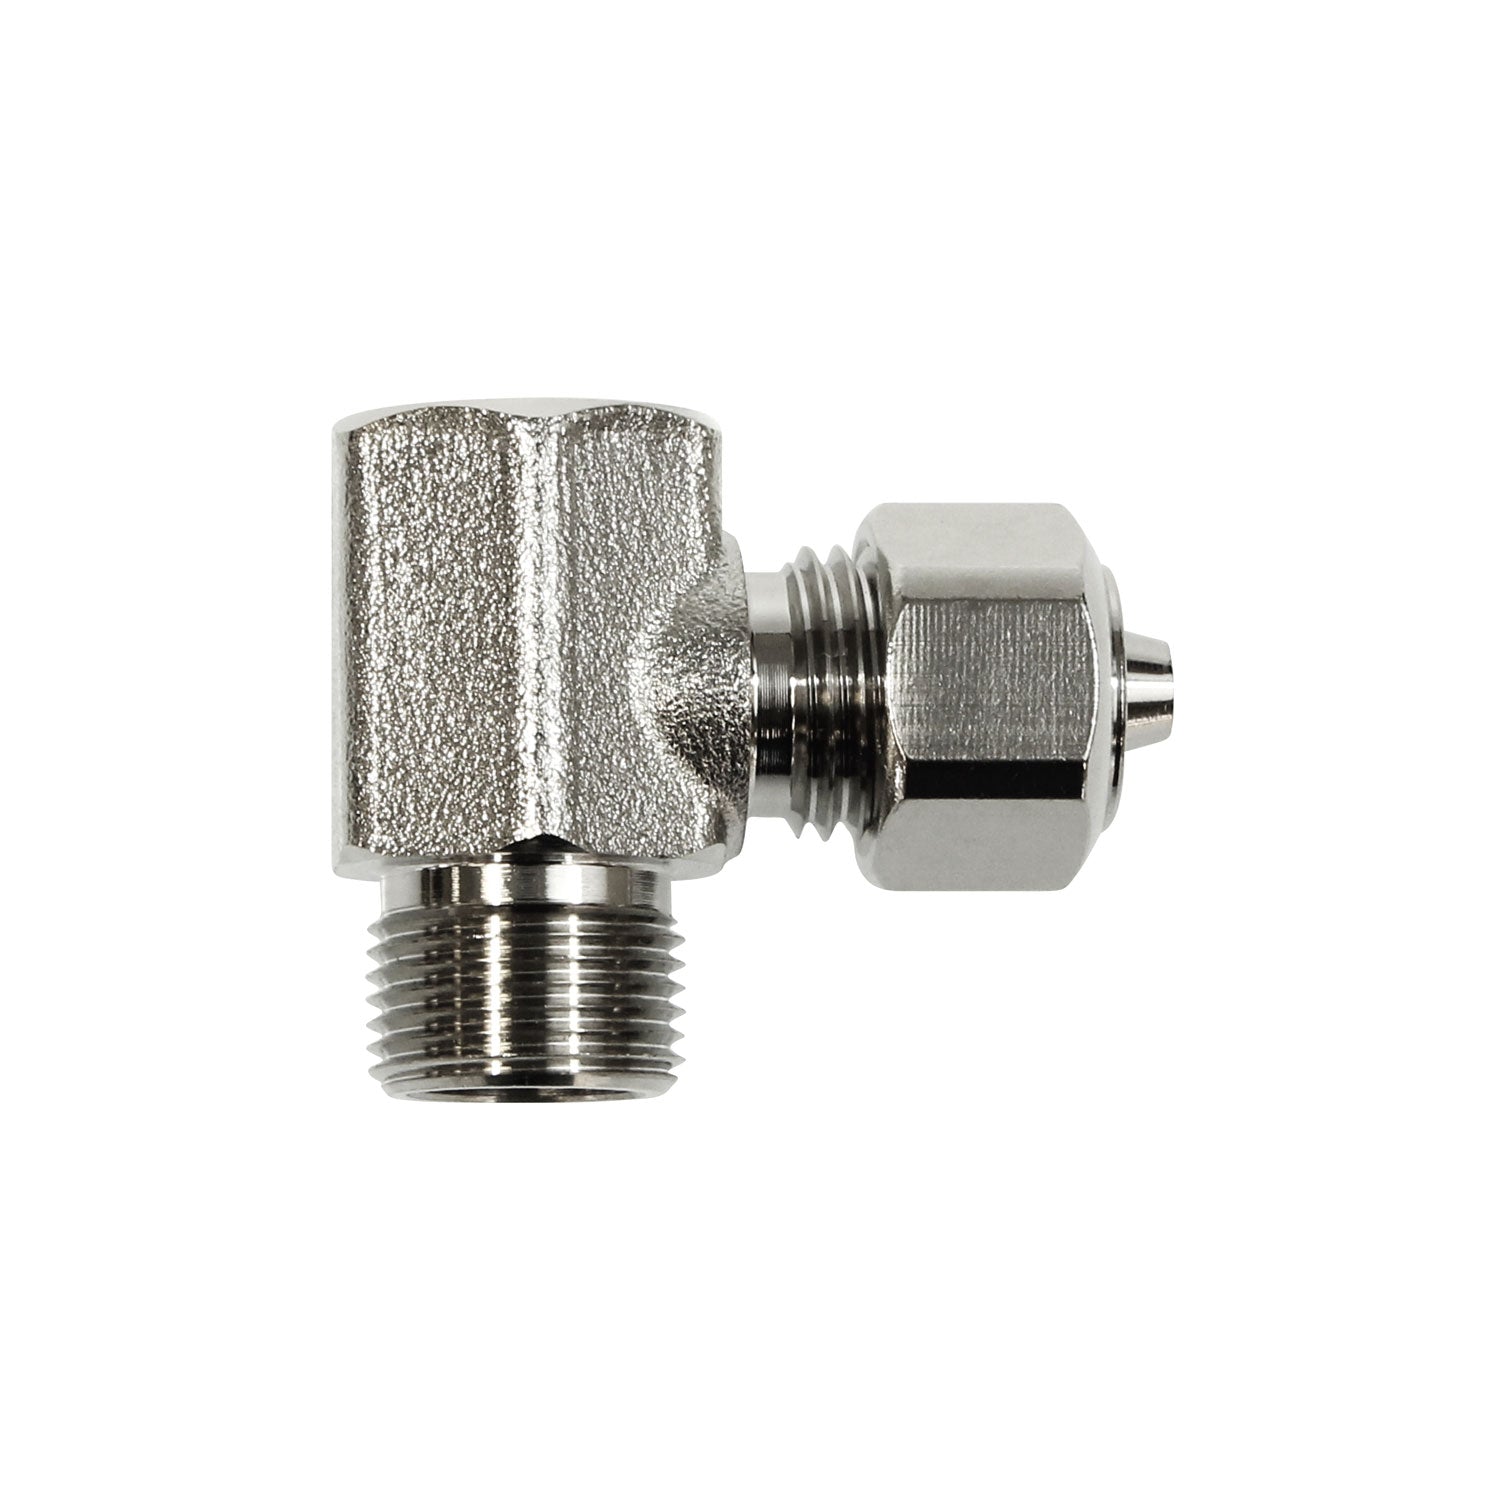 3/8” Hot Water Metal T-Adapter, side view